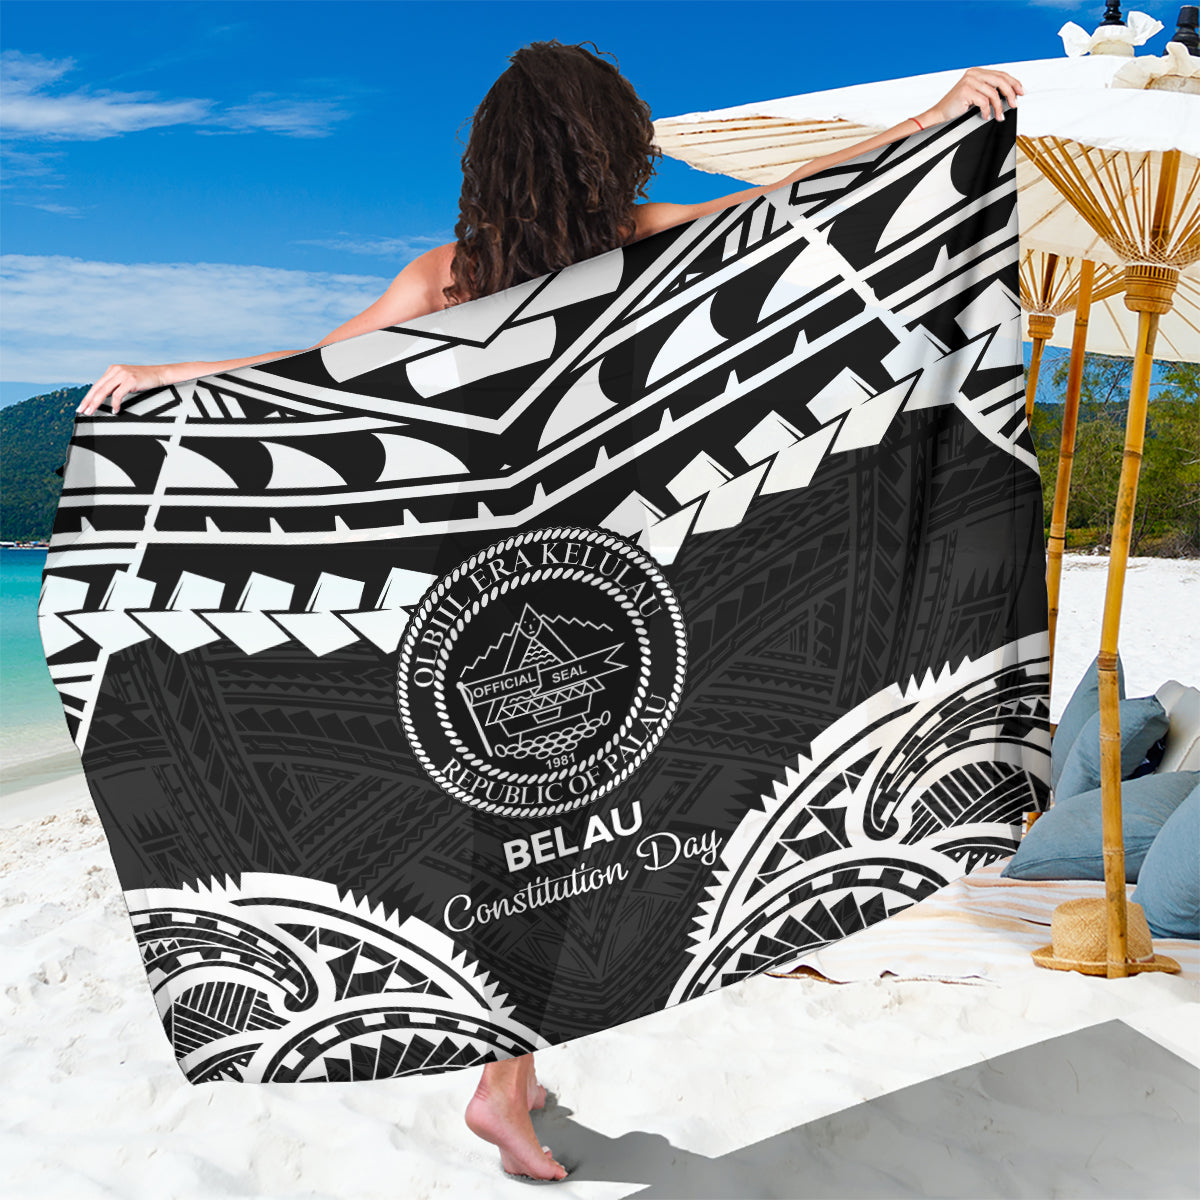 Palau Constitution Day Sarong Belau Seal With Polynesian Pattern - Black